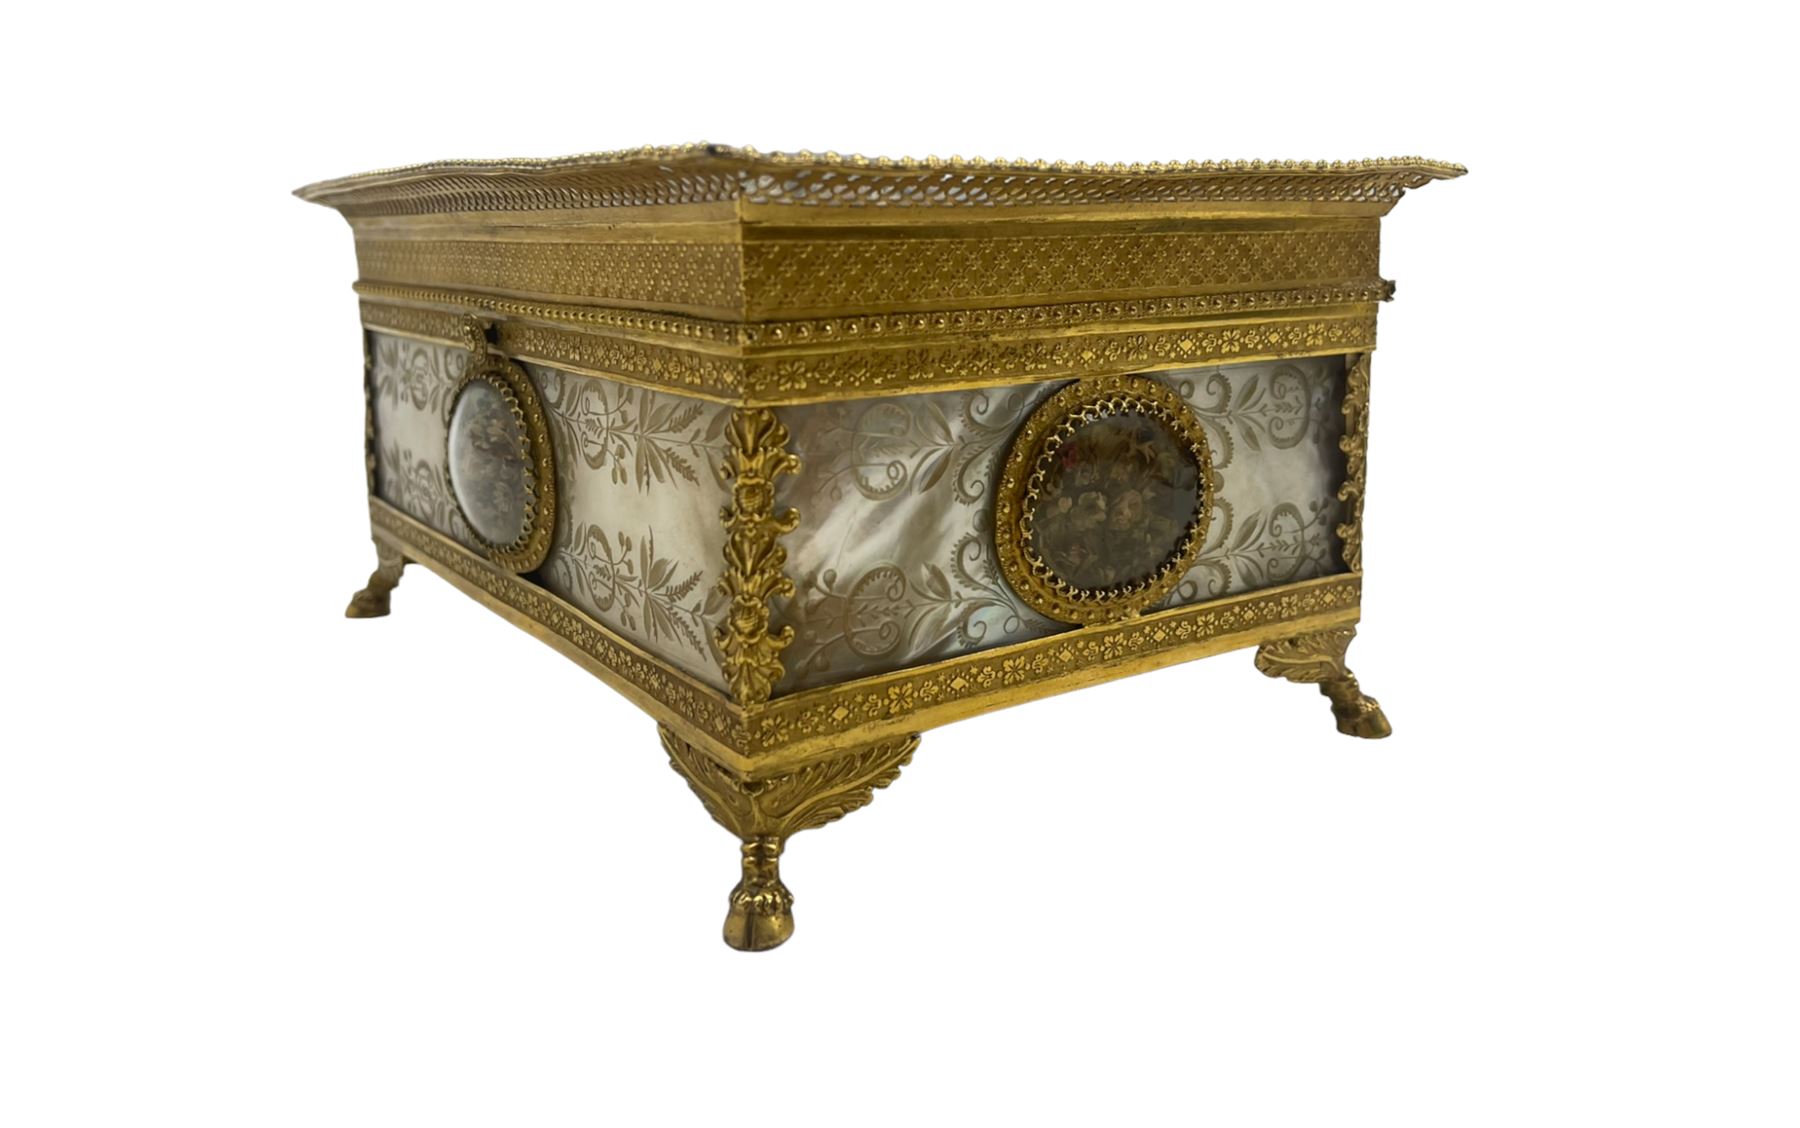 Early 19th century French Palais Royal type ormolu and mother-of-pearl musical sewing etui - Image 16 of 19